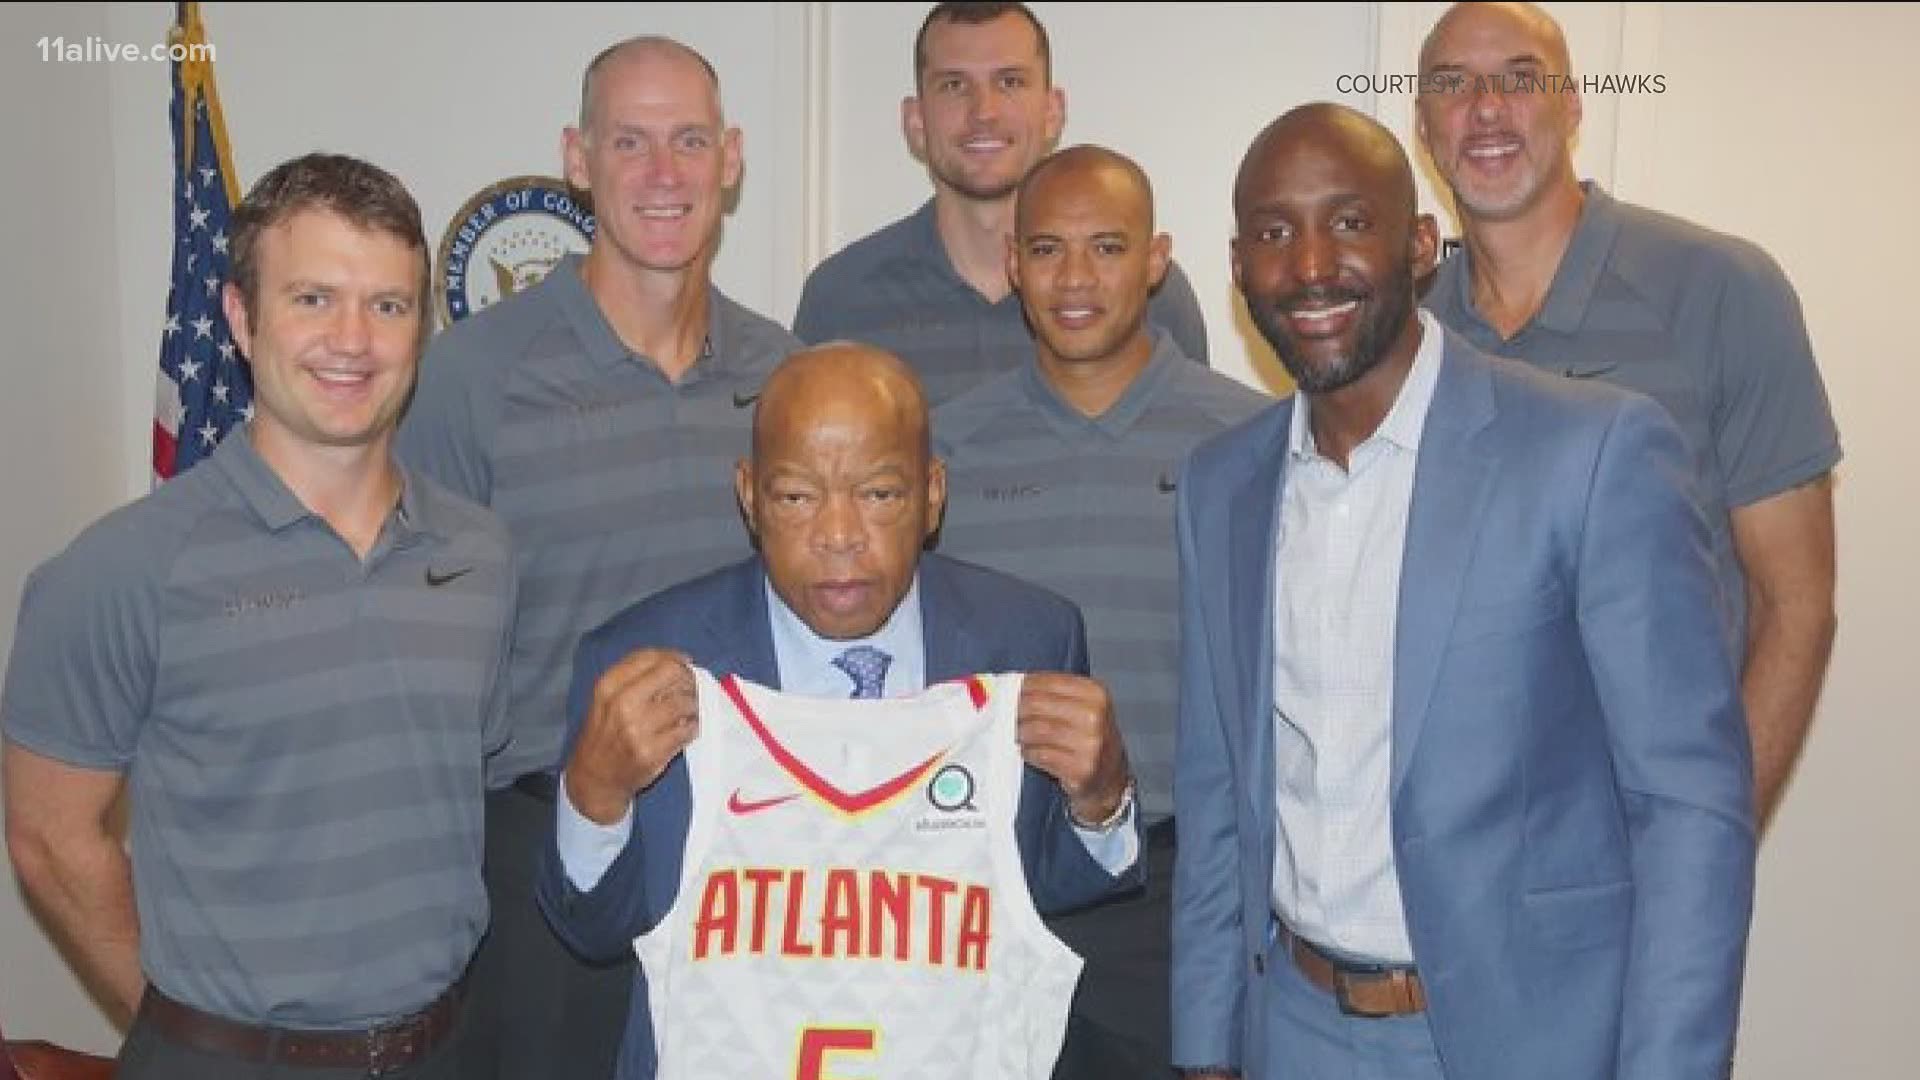 John Lewis not only had a profound impact on this country but also in the sports world as well. Hawks coach Lloyd Pierce reflects on what he learned from Lewis.